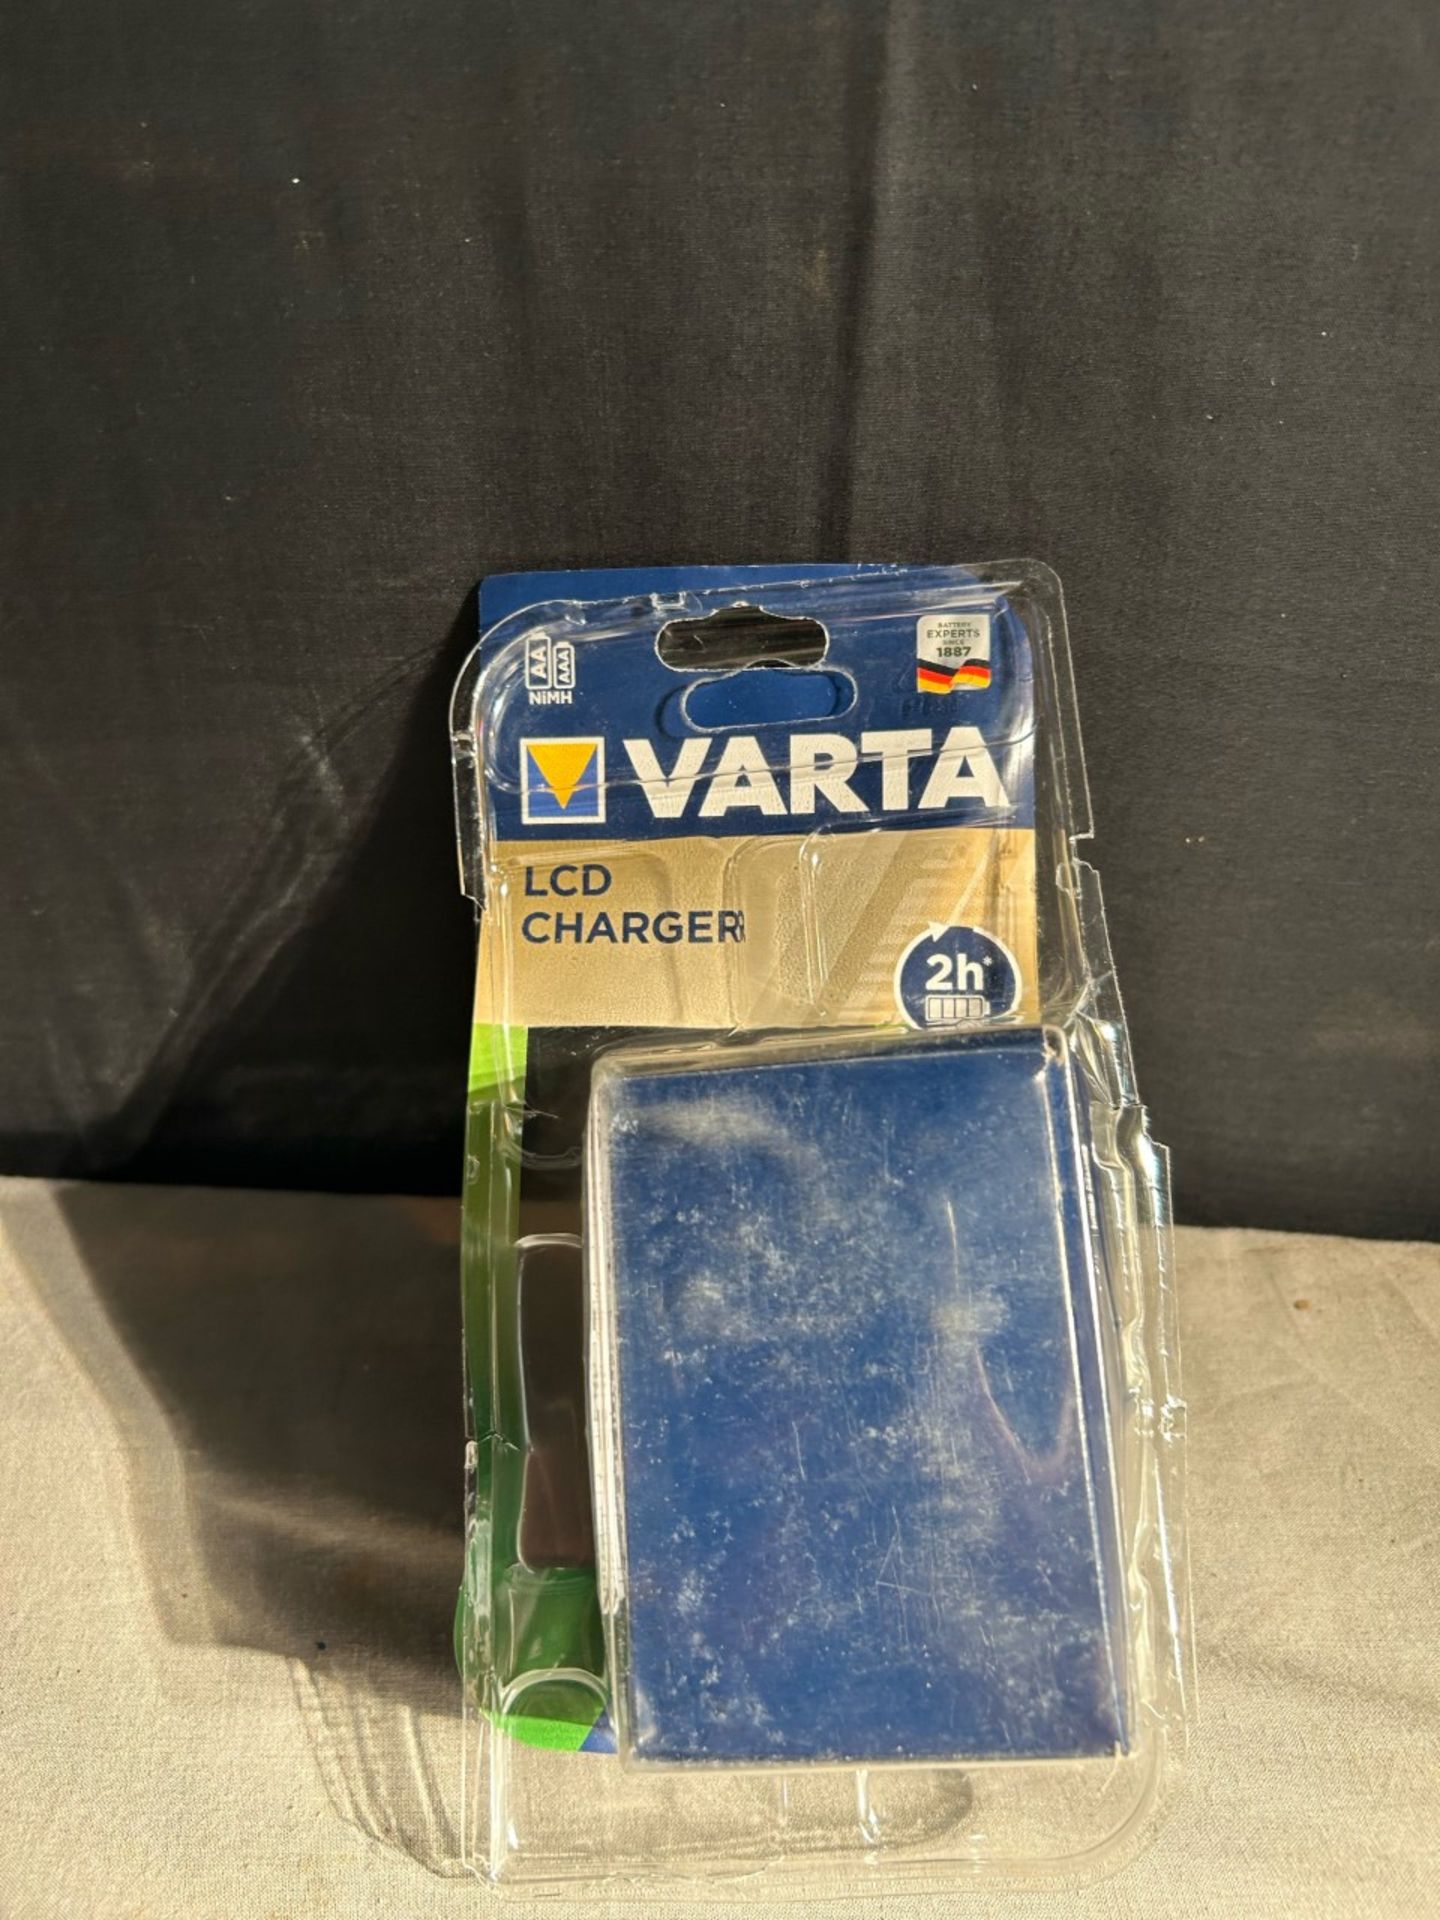 Varta LCD rechargeable battery charger comes with mains plug, 12v plug and sub plug. New in box (box - Image 3 of 3